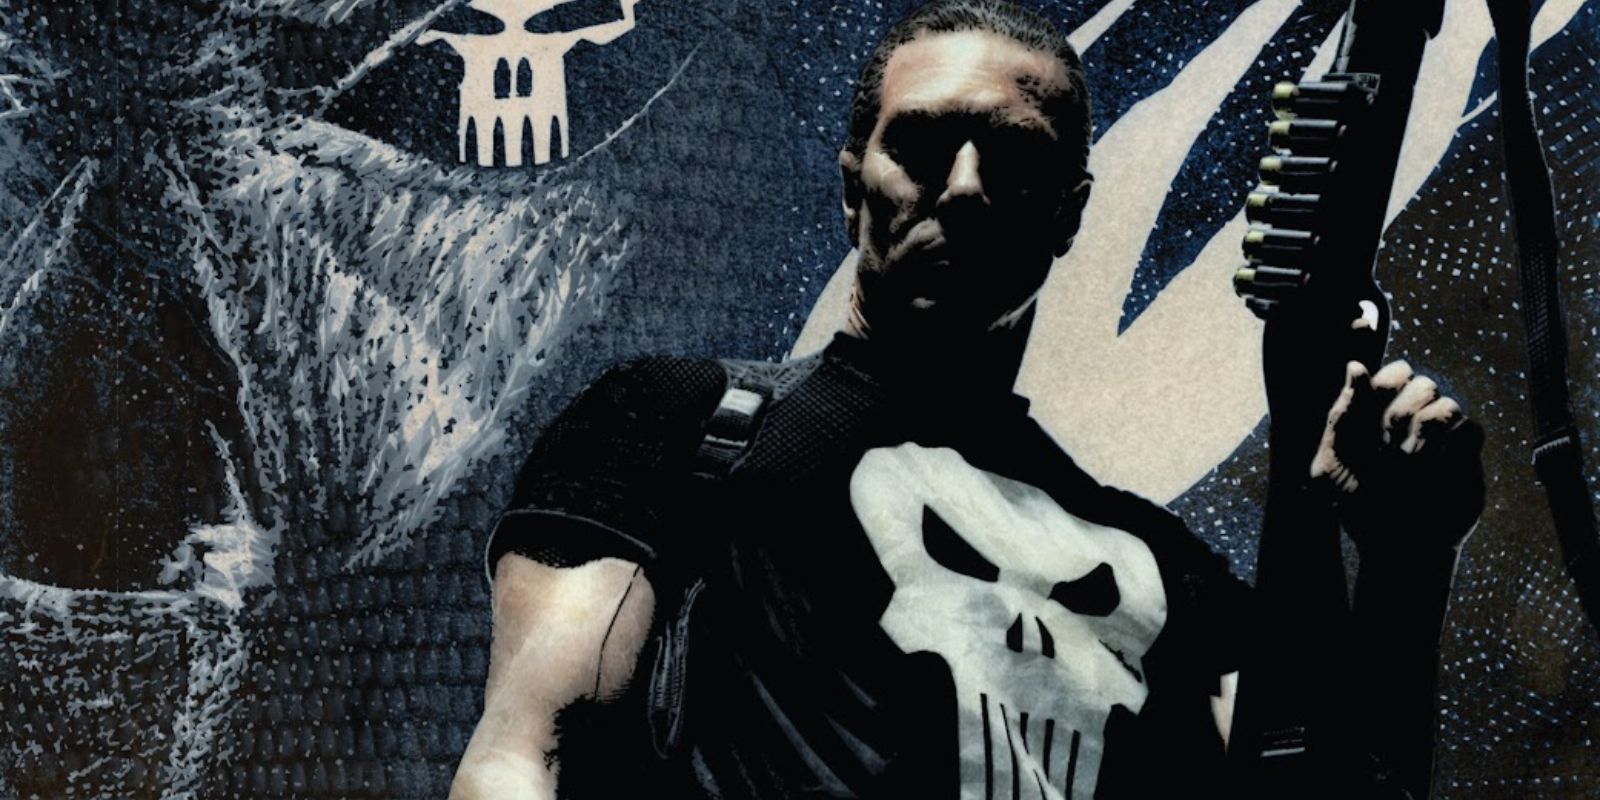 Punisher from Marvel staring at viewer.